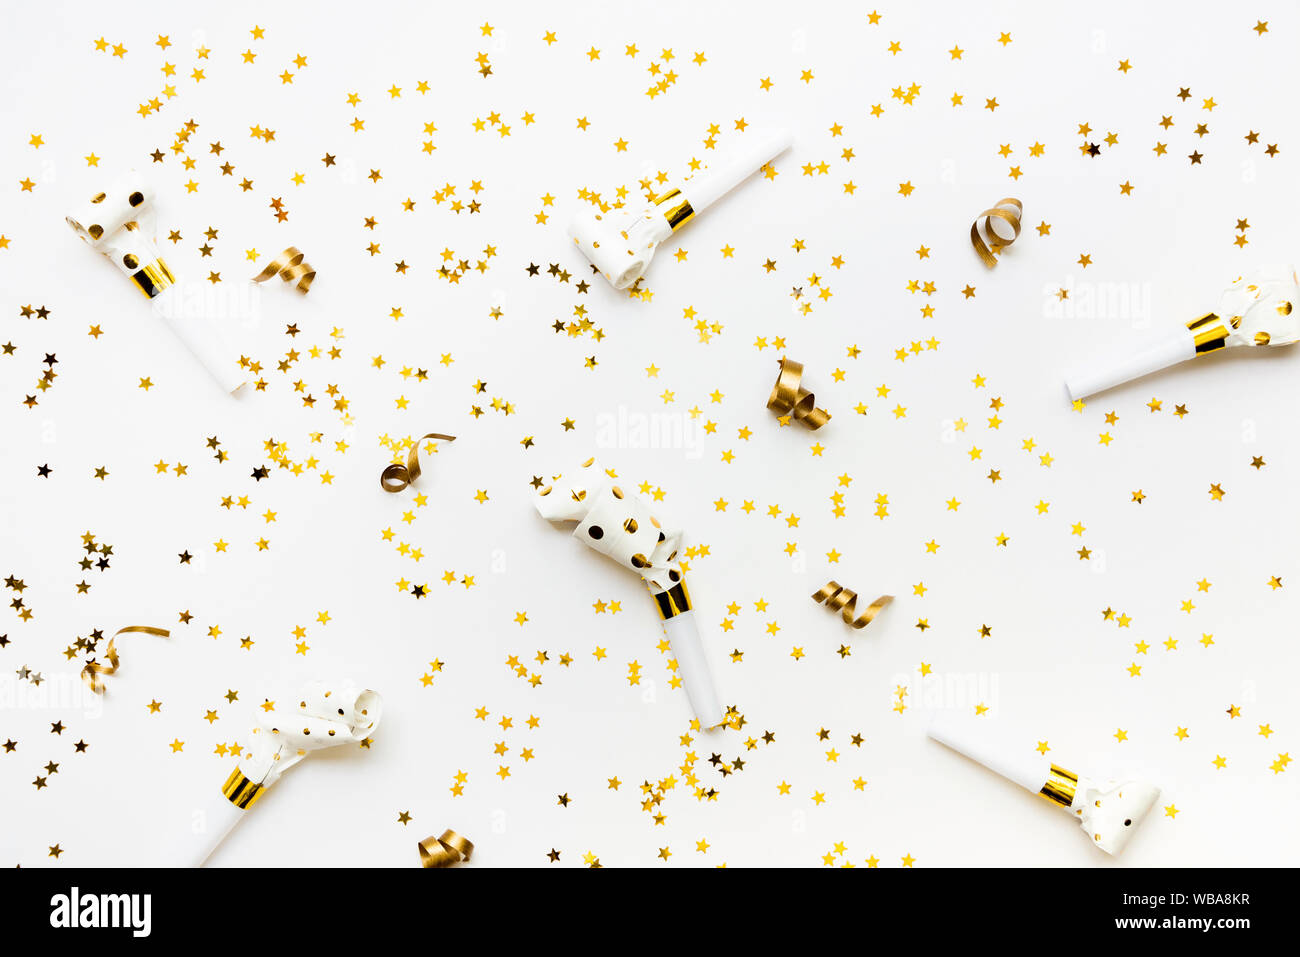 Celebration background - party accessories in golden colors. Stock Photo